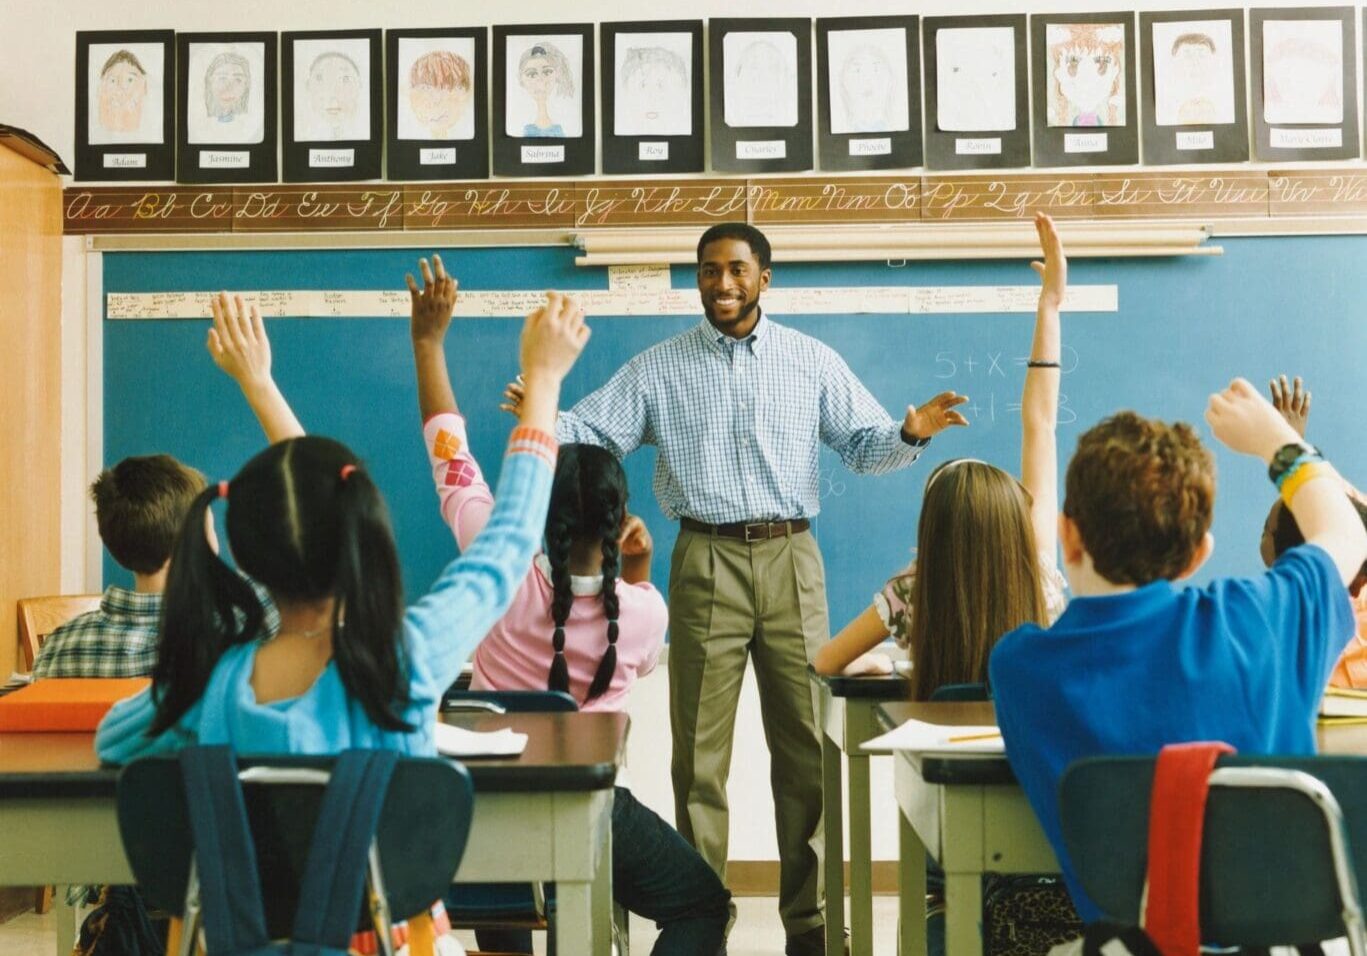 A teacher stands smiling at the front of a classroom while diverse students raise their hands eagerly.